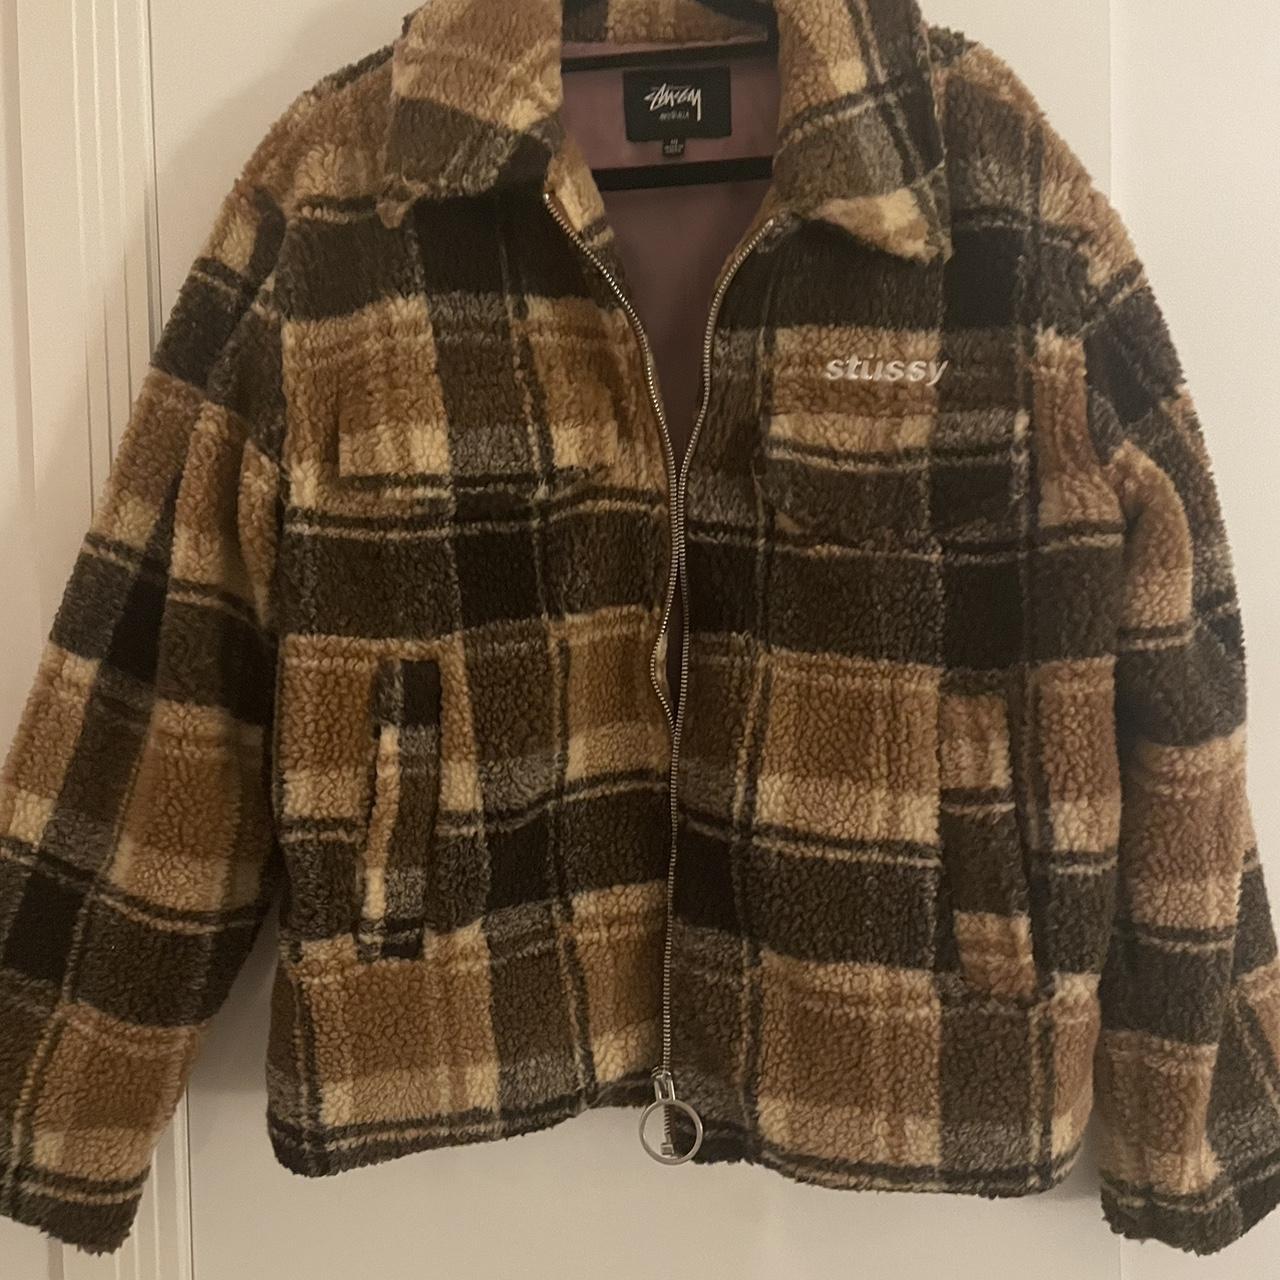 stussy checked jacket worn once size 10 - Depop